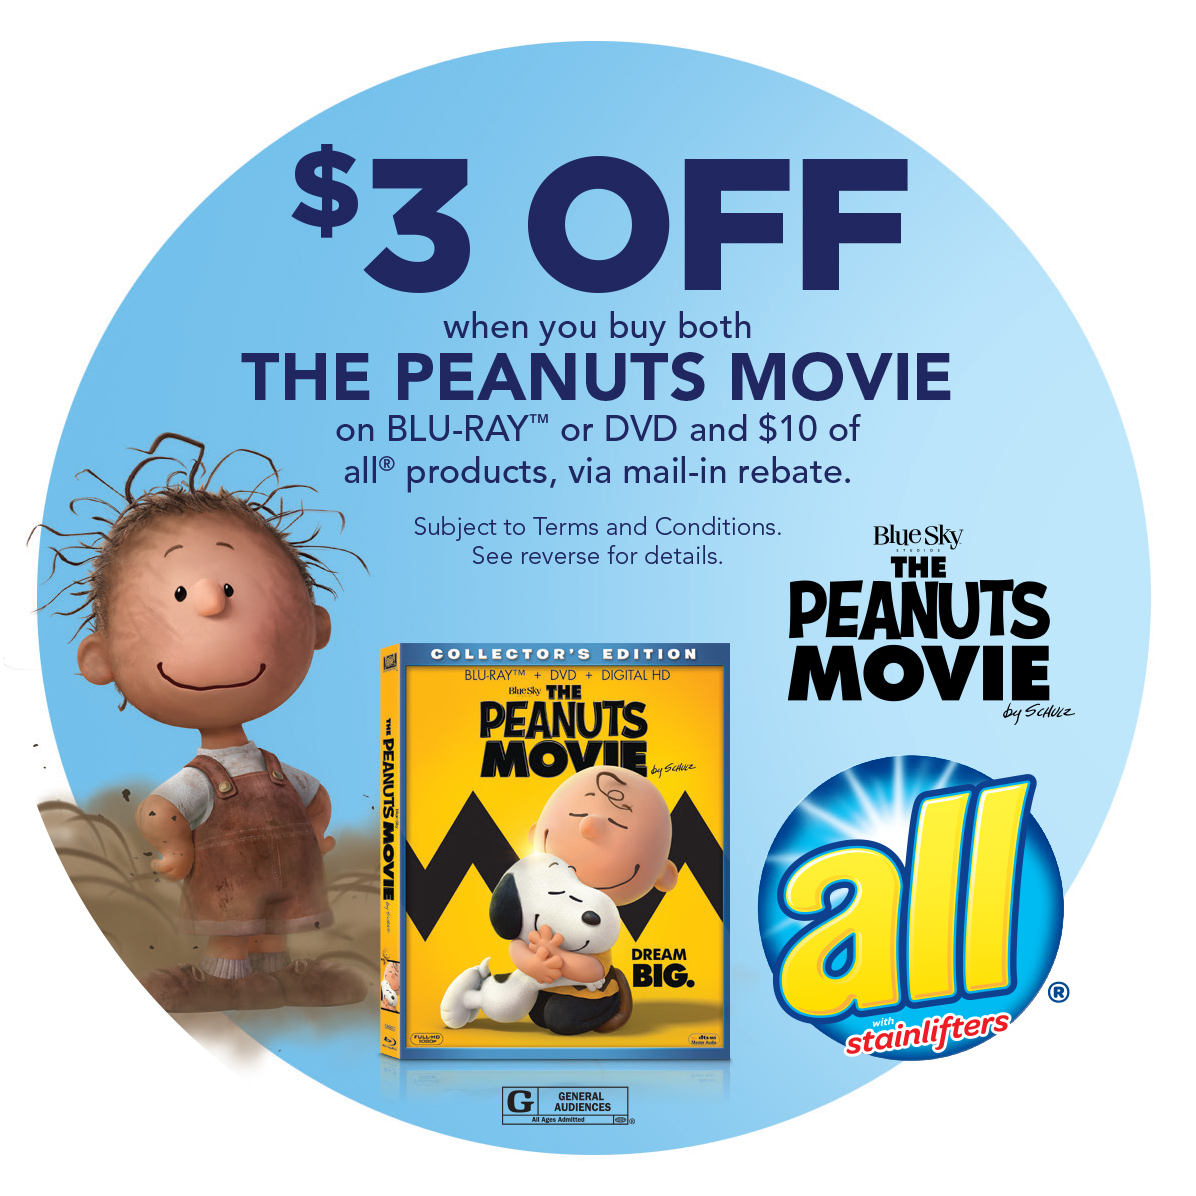 all-brings-blockbuster-peanuts-movie-right-into-your-home-business-wire